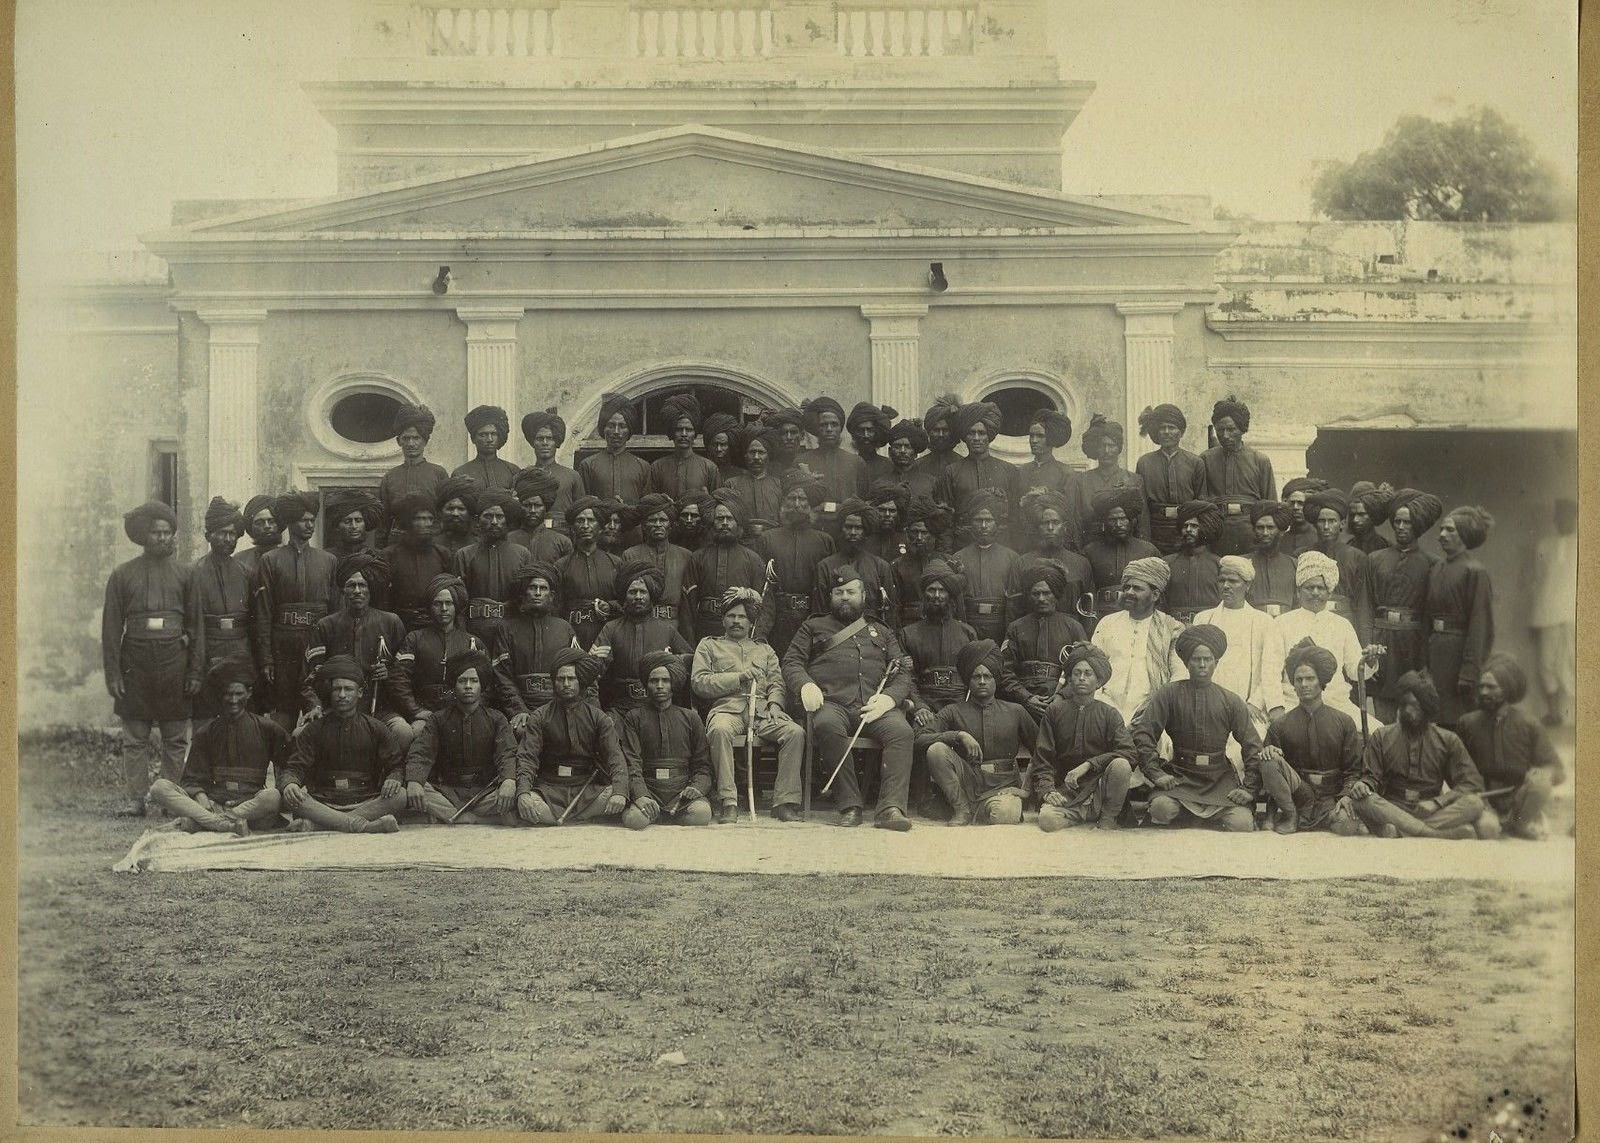 Group photo of Indian Men (Soldiers or Bodyguards) - c1900s